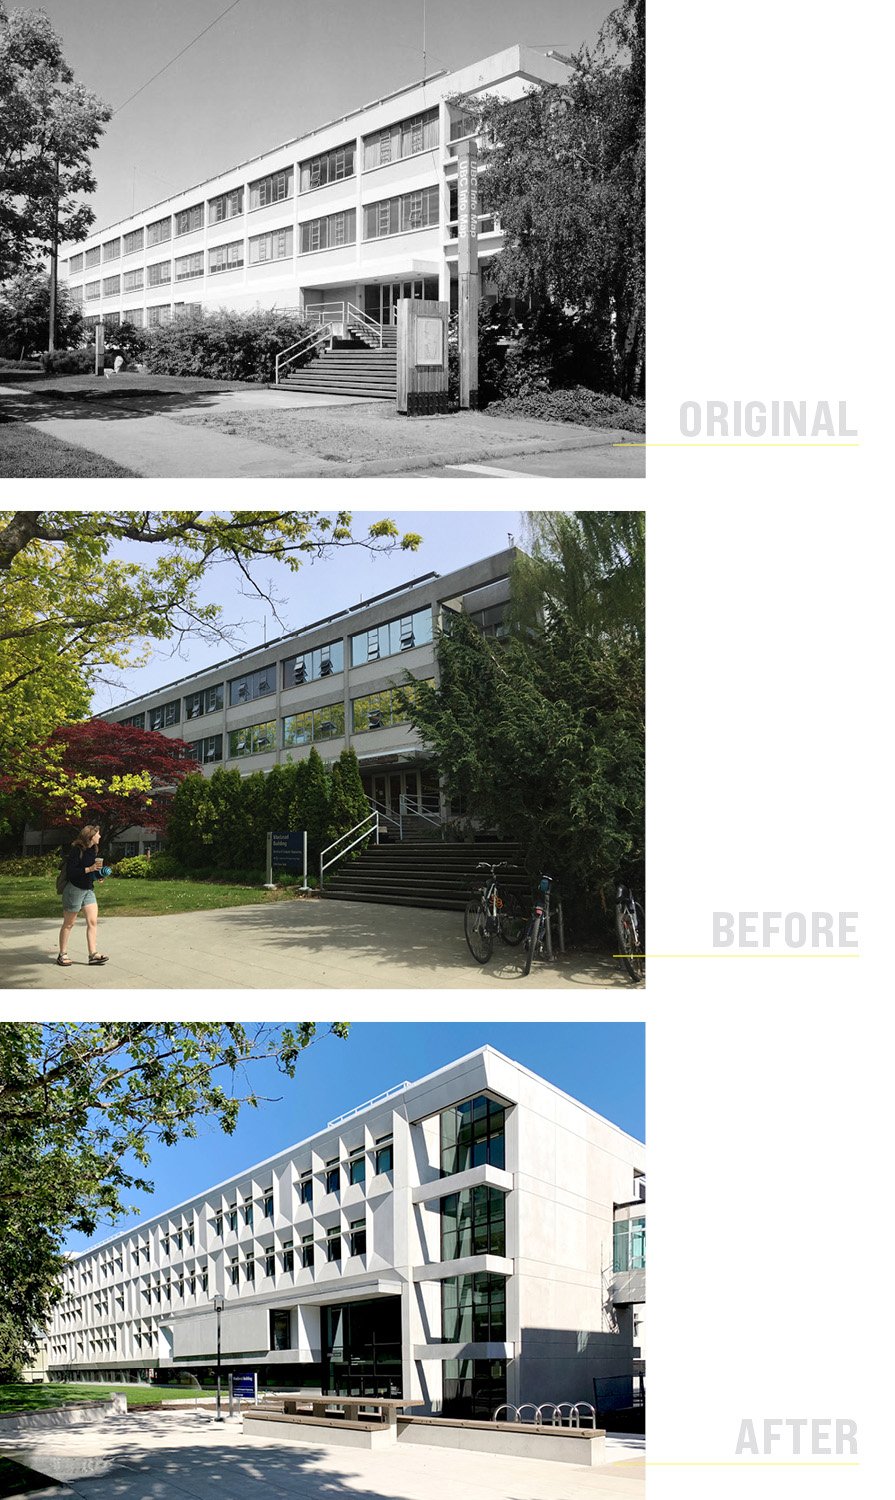 Before and After: The existing building featured an inaccessible, hidden main entrance raised nearly a storey above grade. A relocated, highly visible entry tied to a gently sloped access path, with outdoor seating and generous transparency creates a new | Teeple Architects